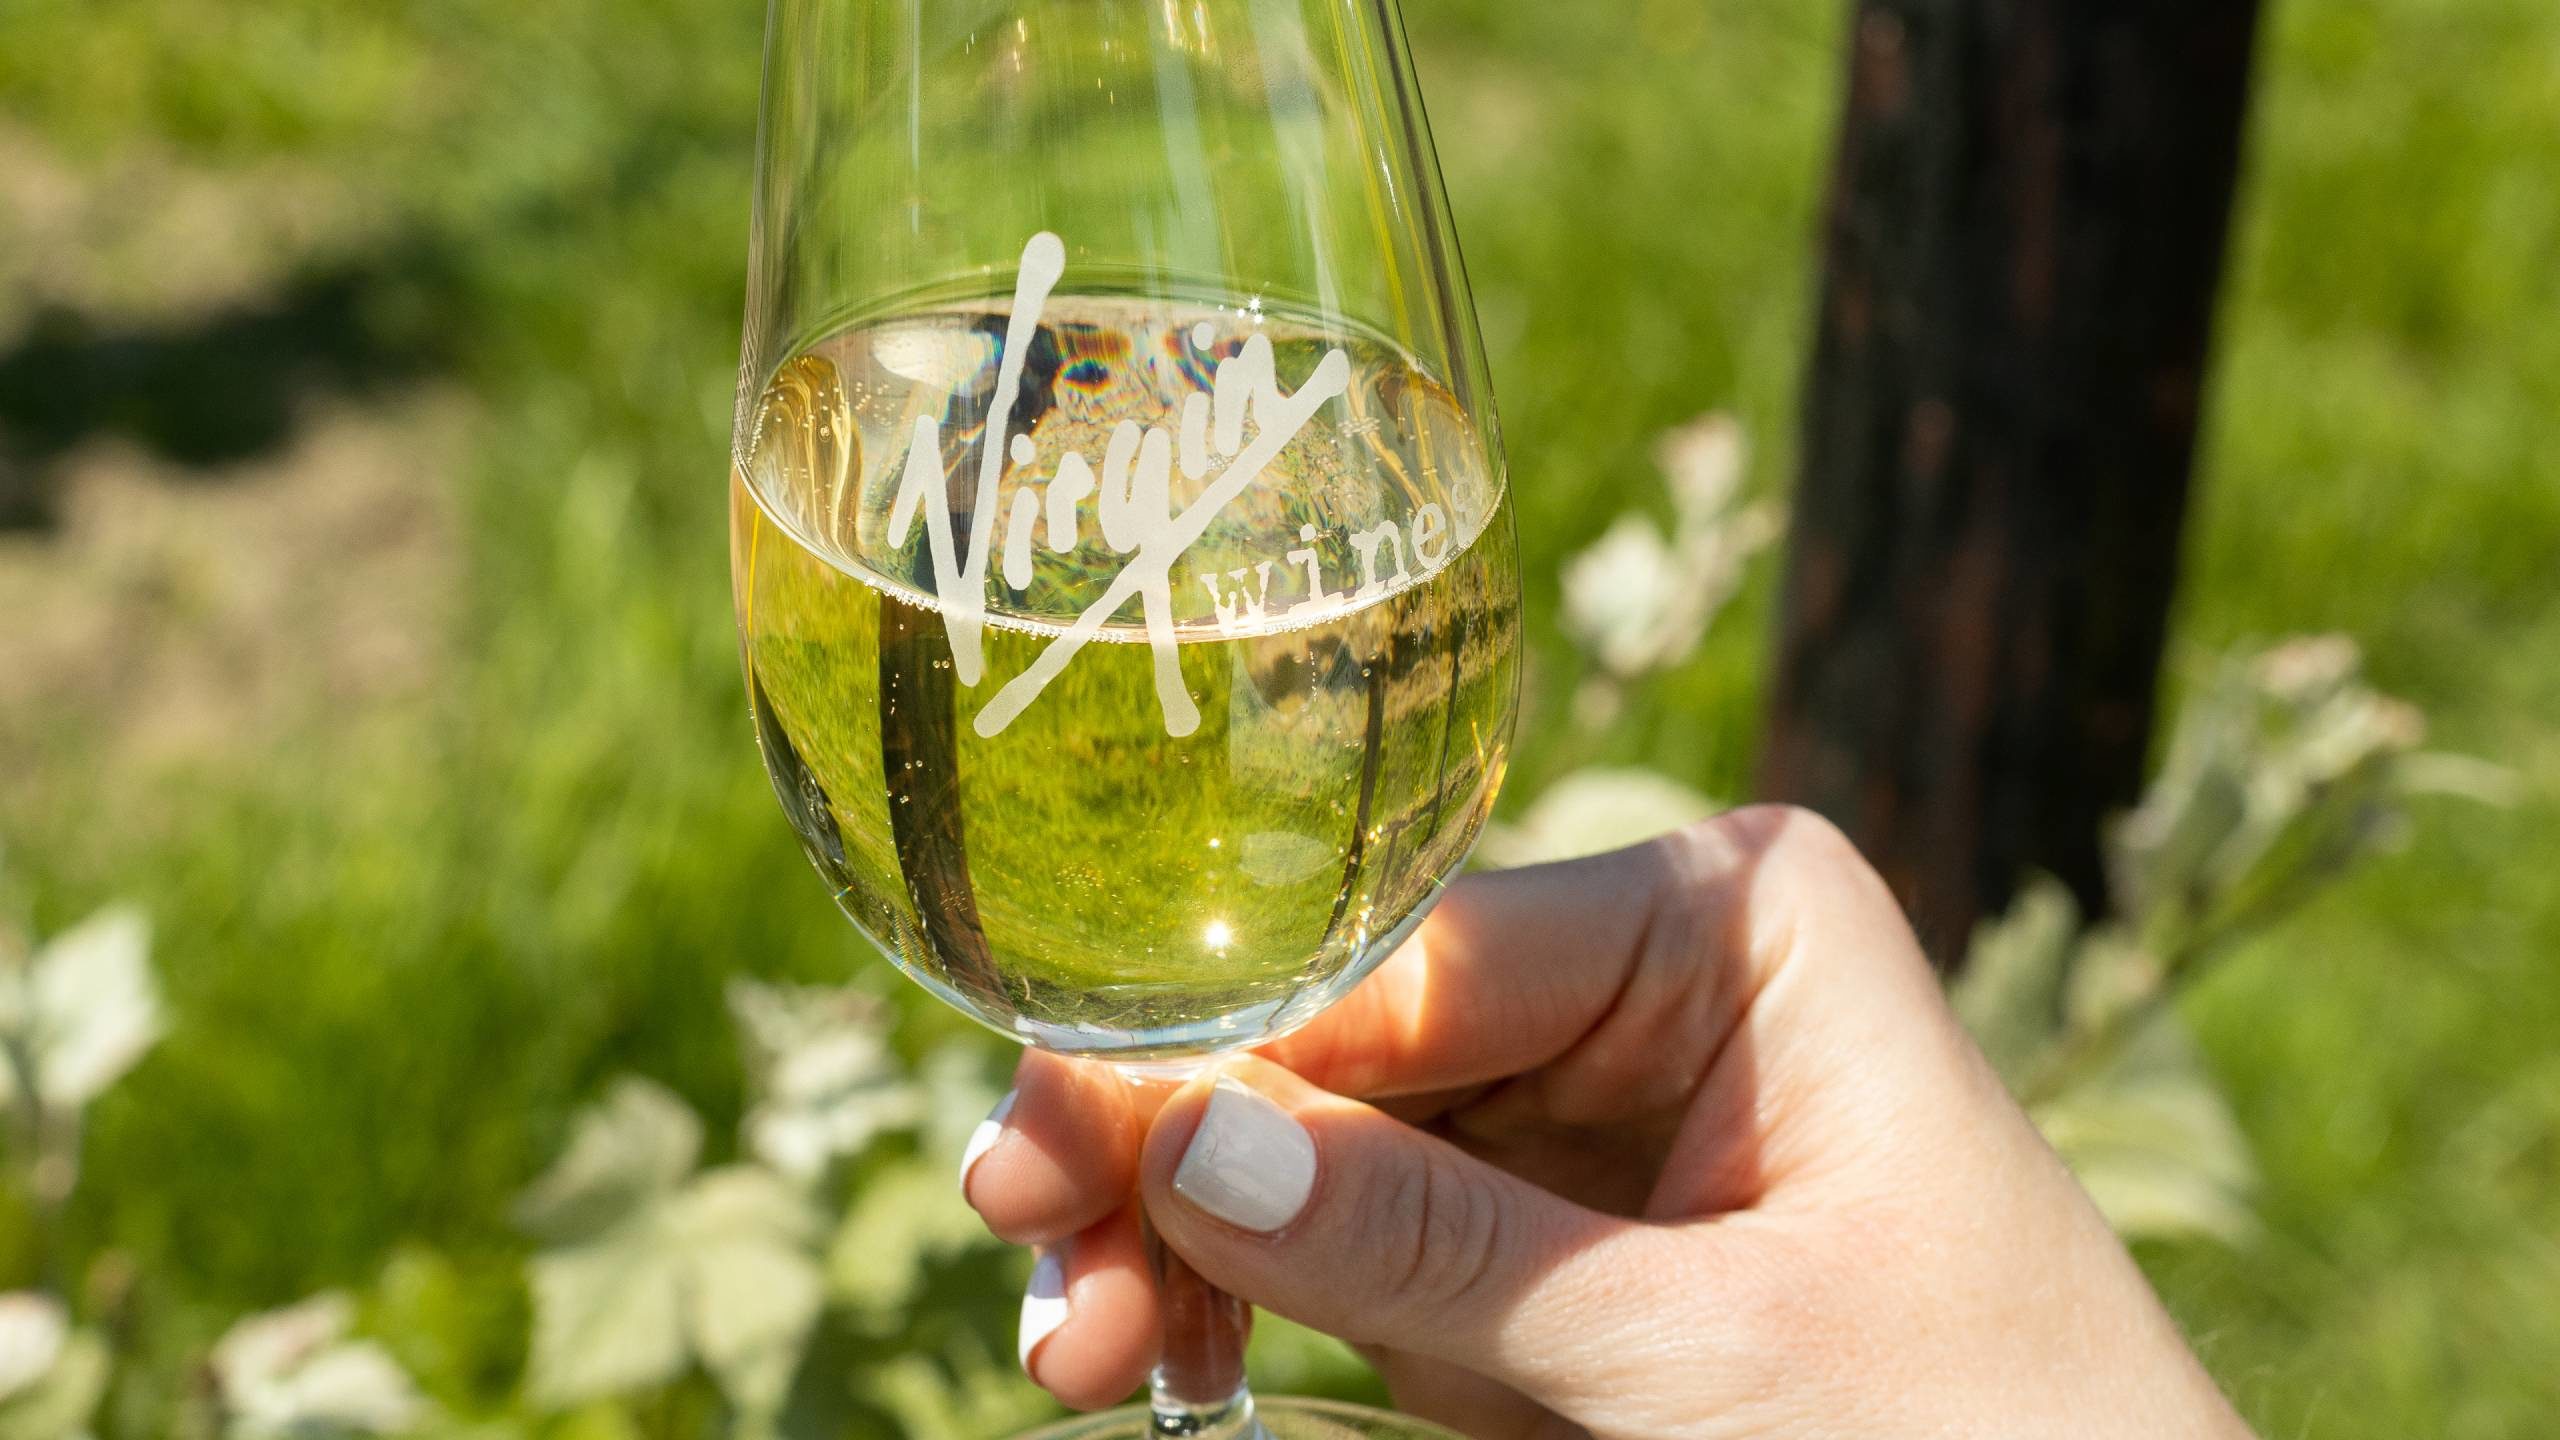 Hand holding a branded Virgin Wines glass of white wine over grass in a vineyard